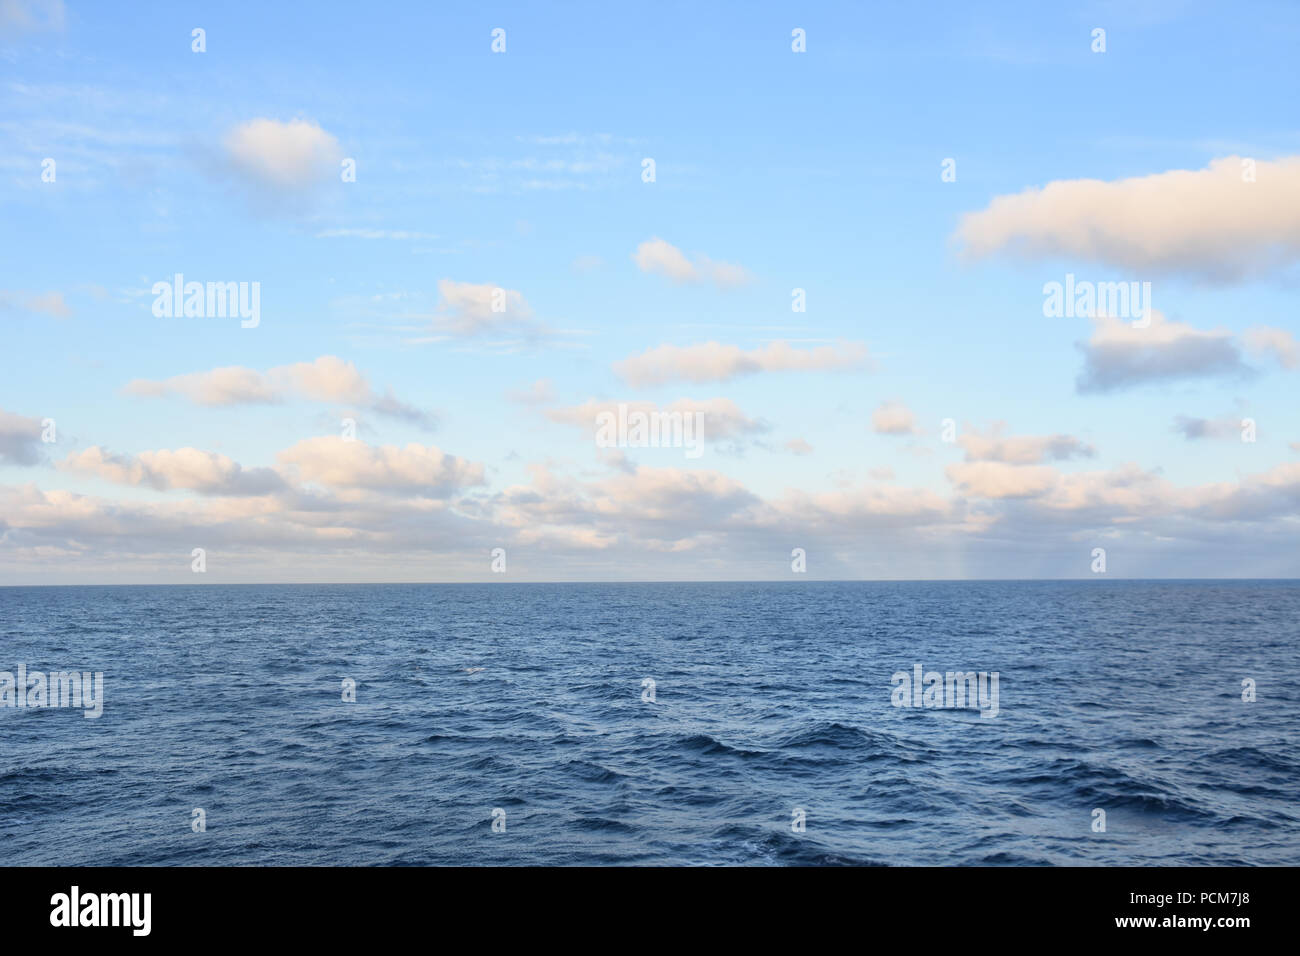 Open water, mid-day, North Sea, taken from ship. July, 2018 Stock Photo